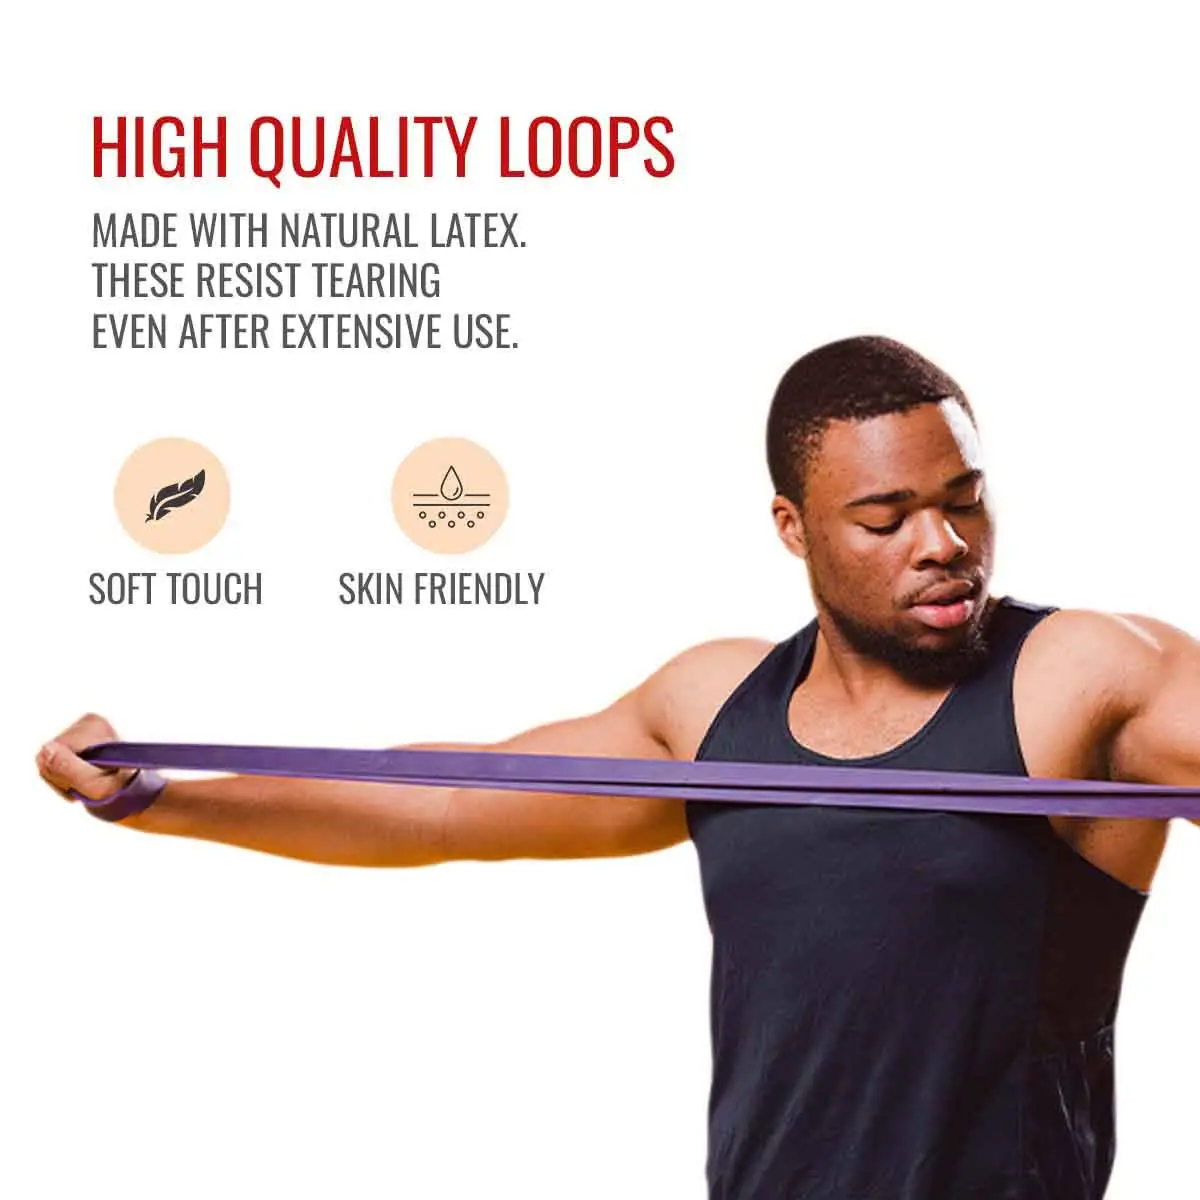 Durafit Resistance Band Orlb1 with High Quality Loops